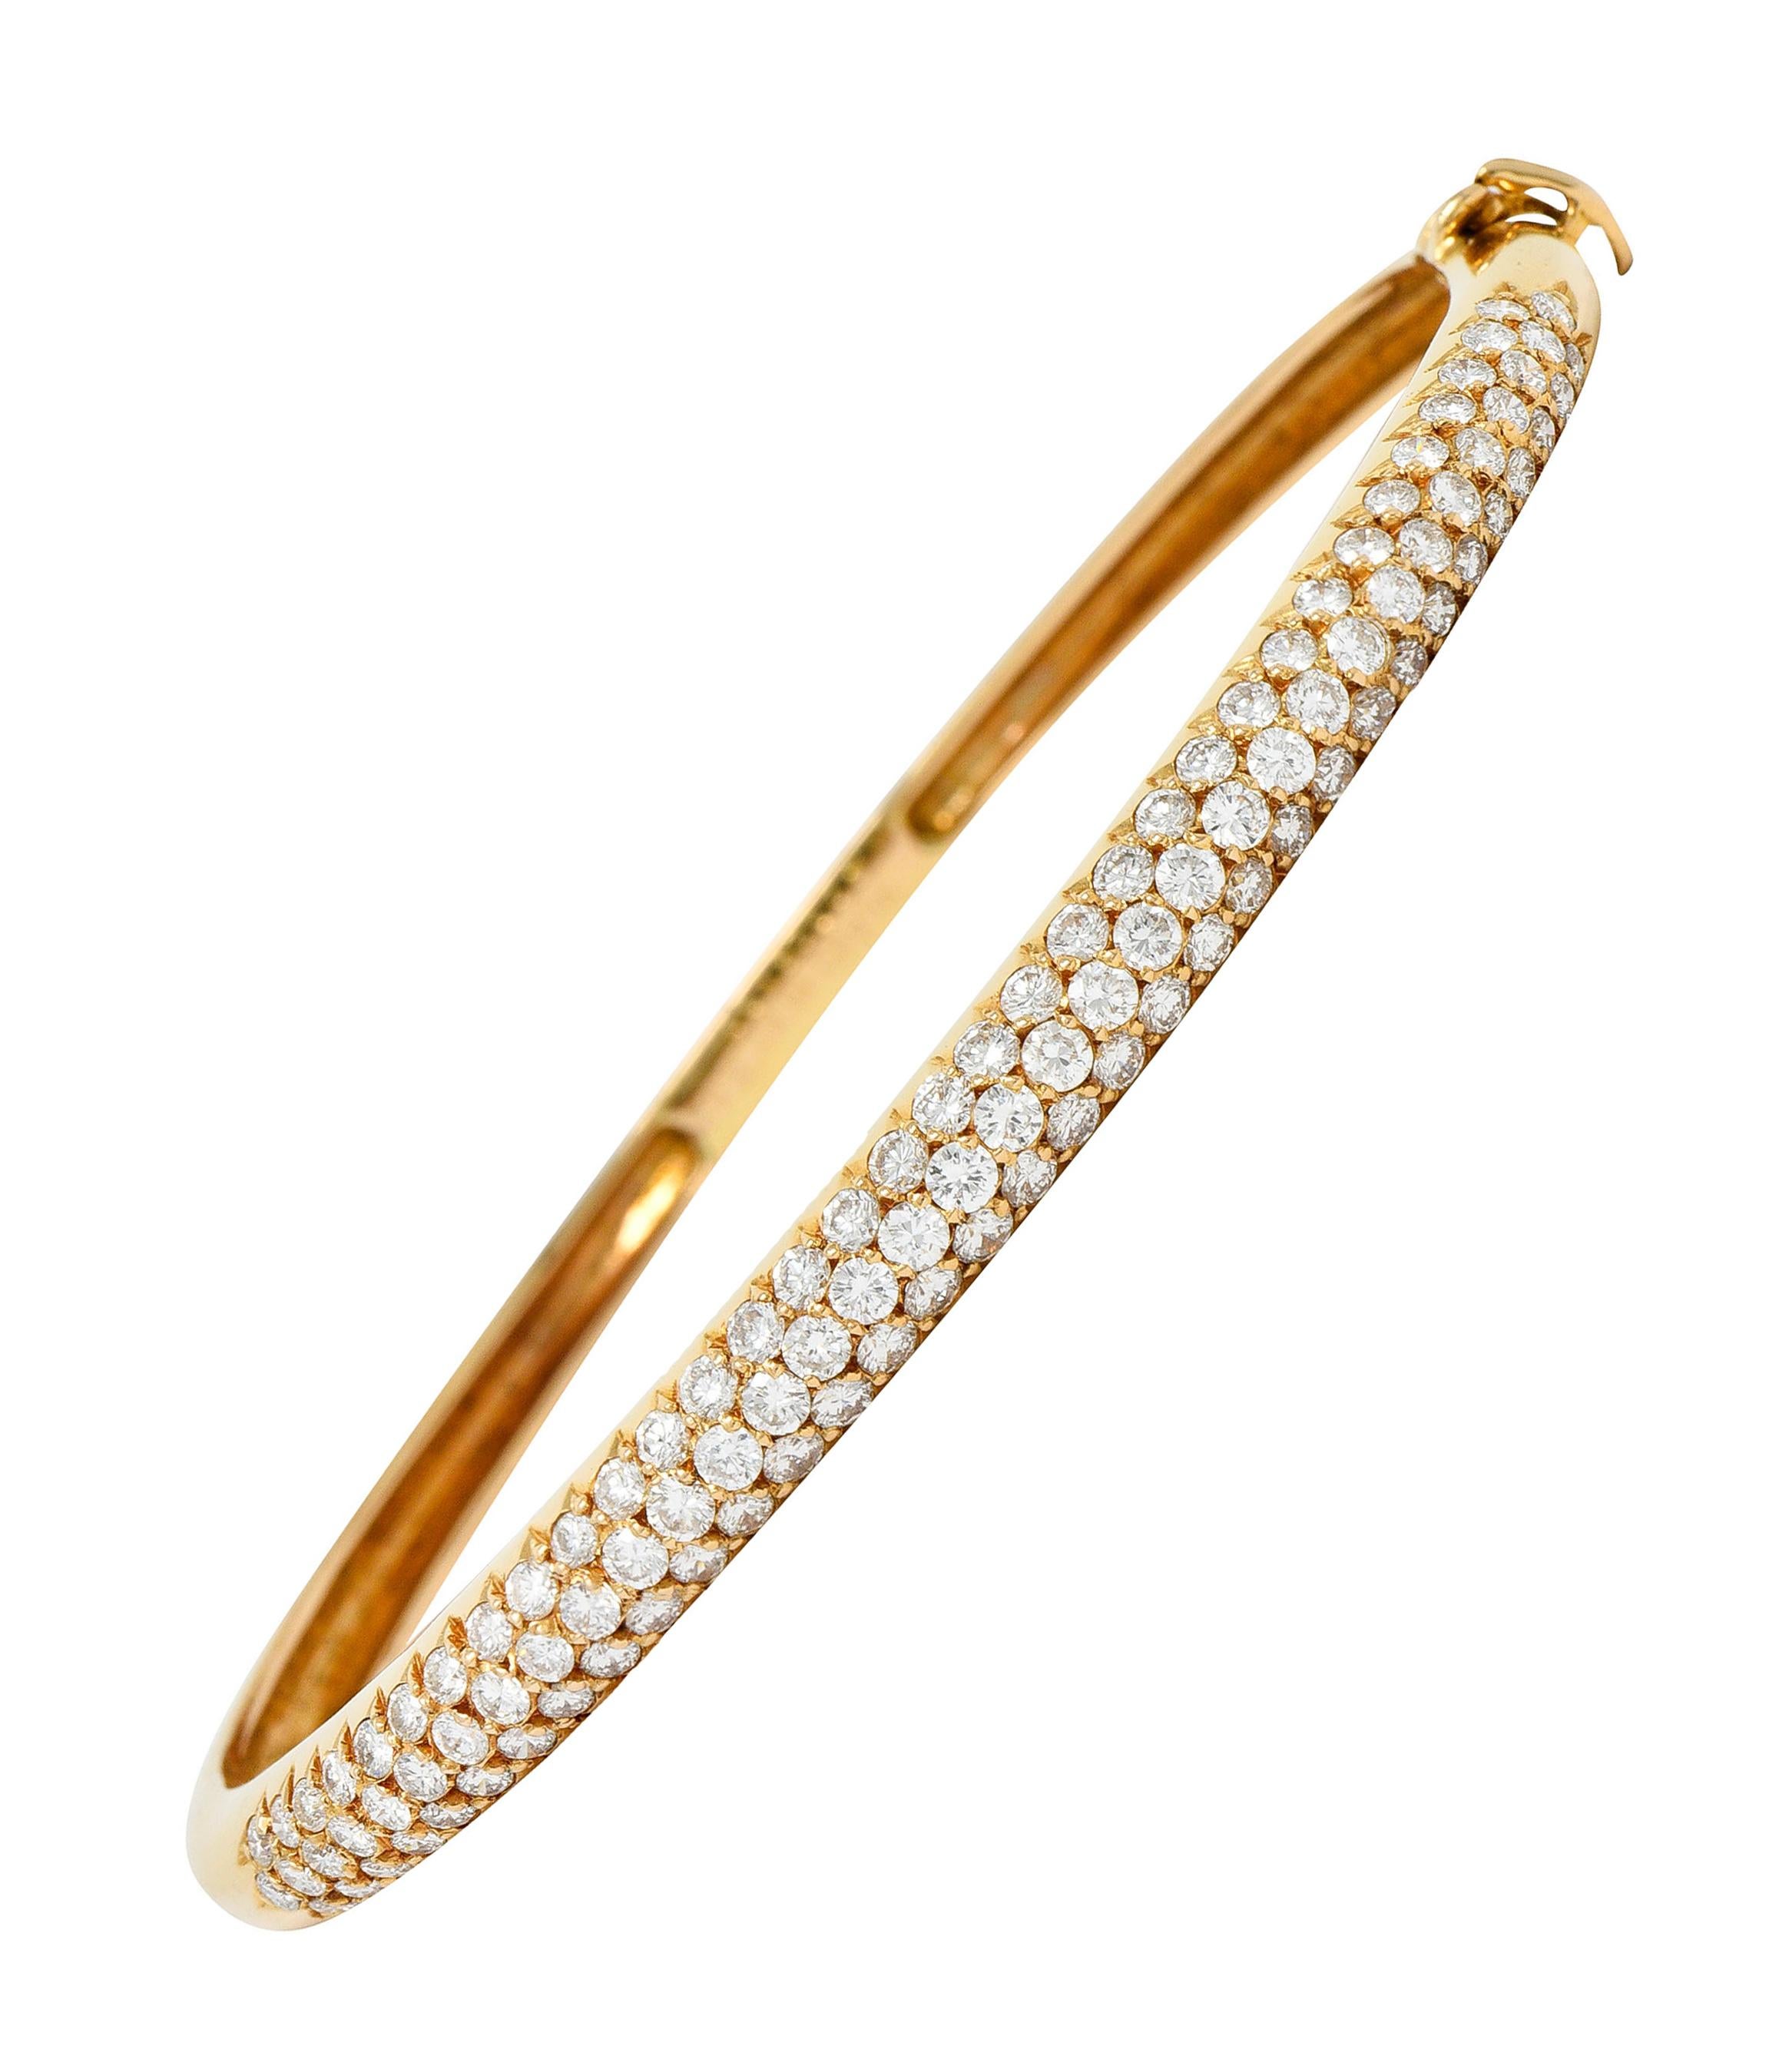 Hinged bangle bracelet is pavé set to front by round brilliant cut diamonds

Weighing in total 2.42 carats with F/G color and VS clarity

Completed by a concealed clasp with a fold-over safety

Stamped 18KT and with French assay mark for 18 karat